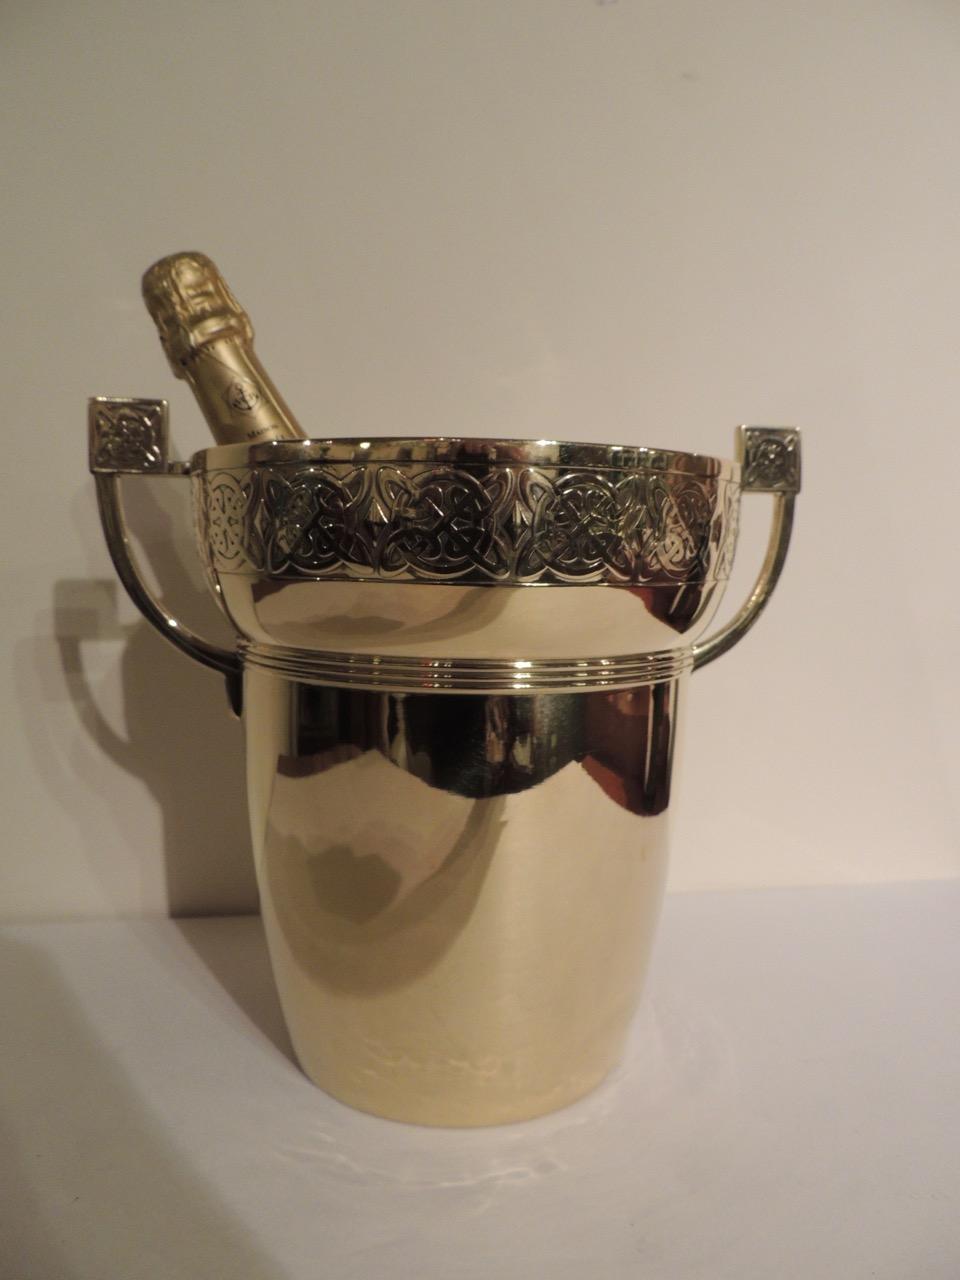 Art Nouveau Champagne Bucket of exceptional quality in polished brass. This wine cooler has a lovely shape that billows at the top and has a pressed Jugendstil/Nouveau design embellishing the edge. “Trophy” handles add to the style. This piece